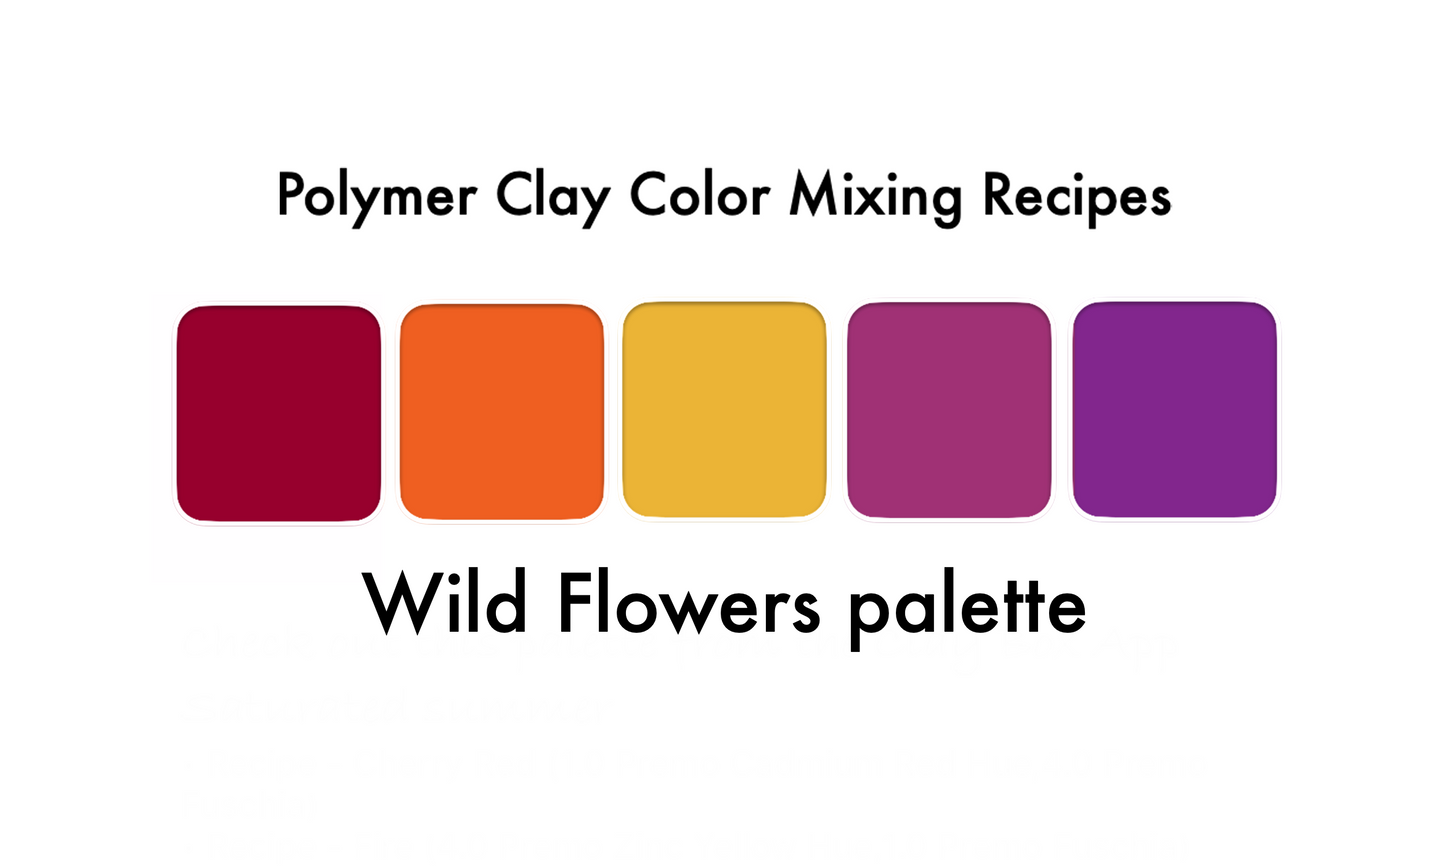 Wild Flowers palette - color recipes for Premo polymer clay